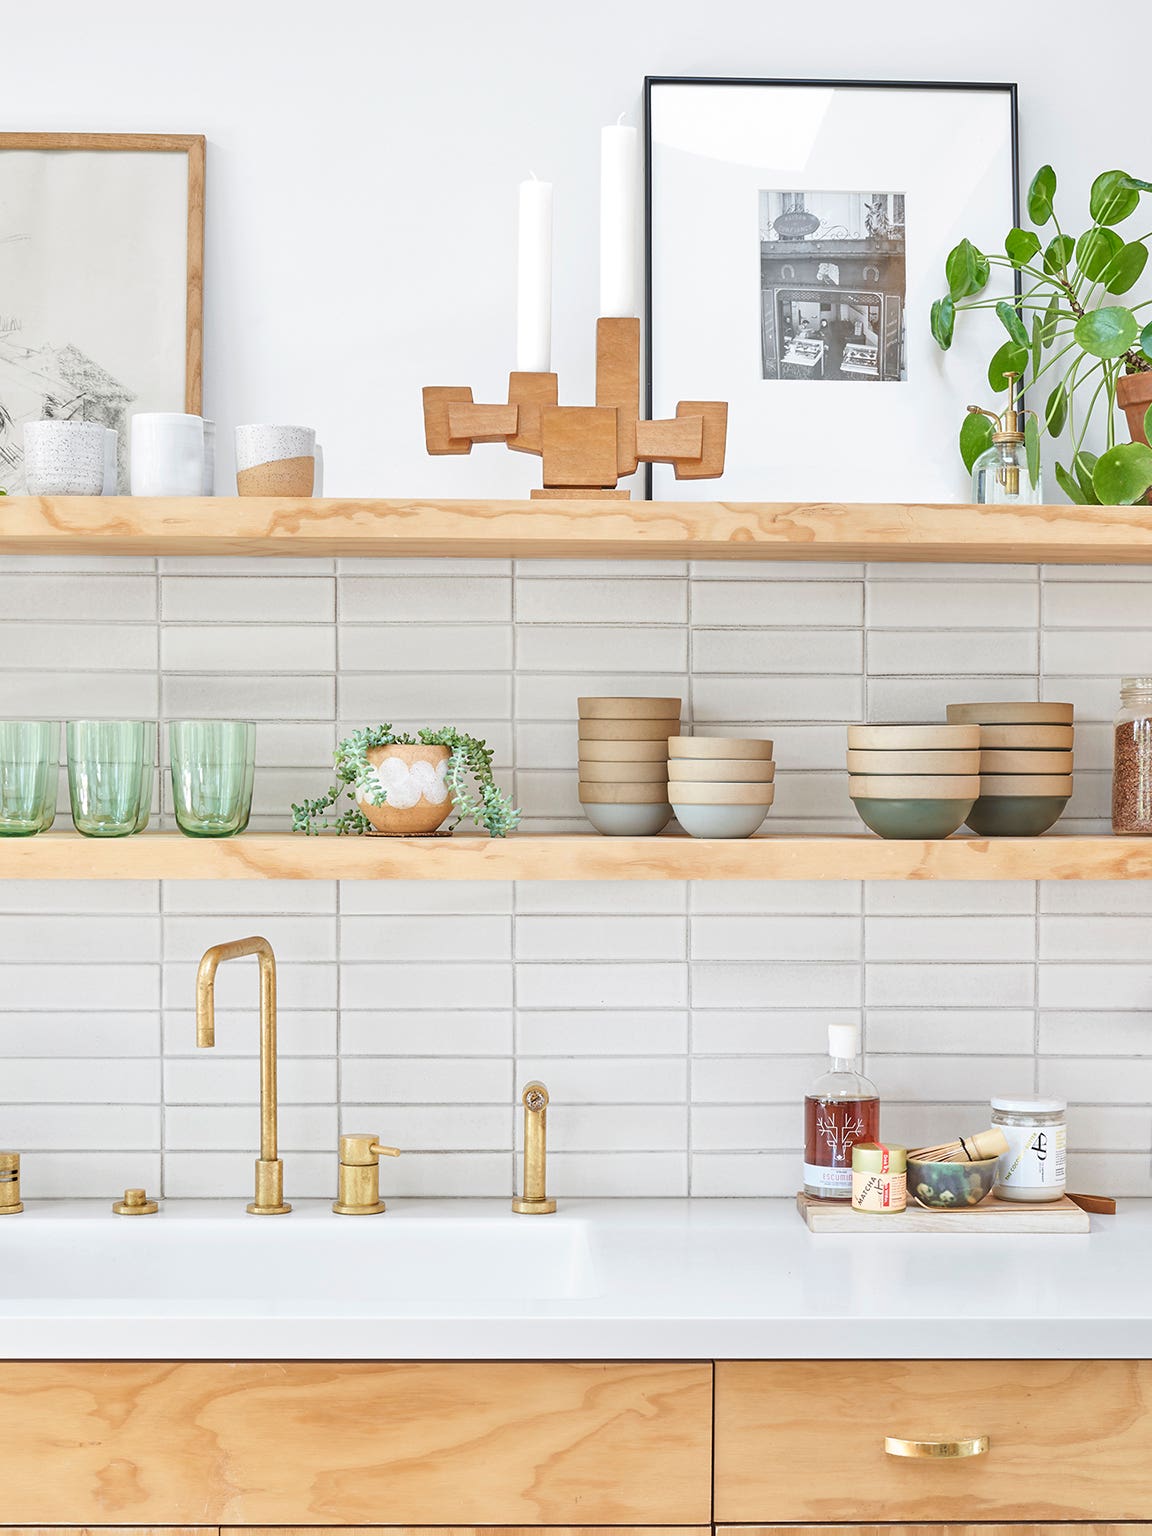 This Kitchen Feature Revolutionized Cleanup for a Family of 4